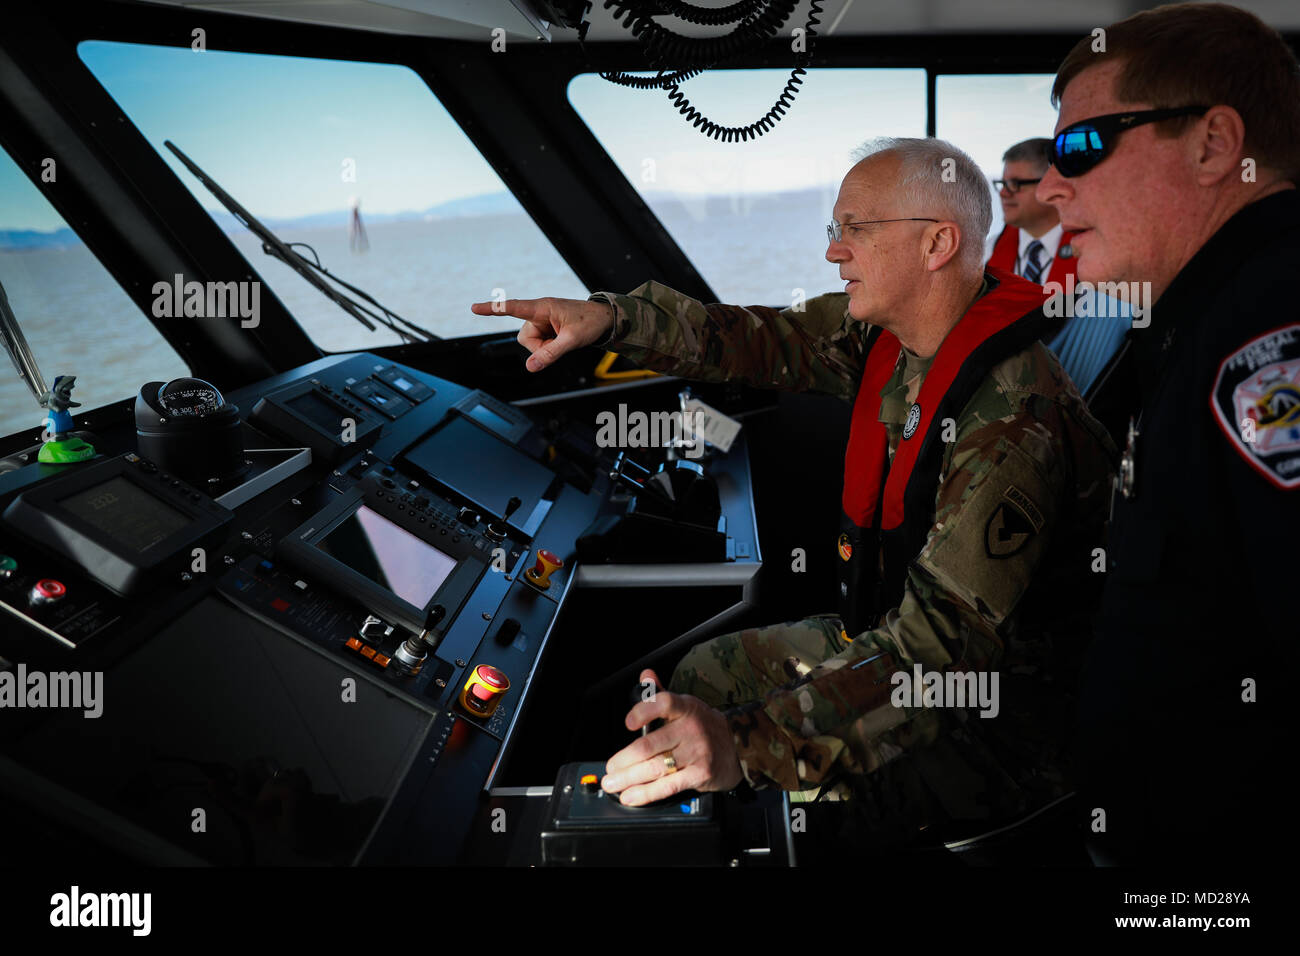 Maj. Gen. Allen M. Harrell drives one of two U.S. Army fire boats during Operation Trans Mariner 18 West at Military Ocean Terminal Concord, California, Mar. 6, 2018. Trans Mariner 18 West is a real-world strategic mission utilizing U.S. Army Reserve, National Guard and Active component Soldiers to conduct Port Operations allowing Army materiel and munitions containers for travel onward.    (U.S. Army photo by Sgt. Eben Boothby) Stock Photo